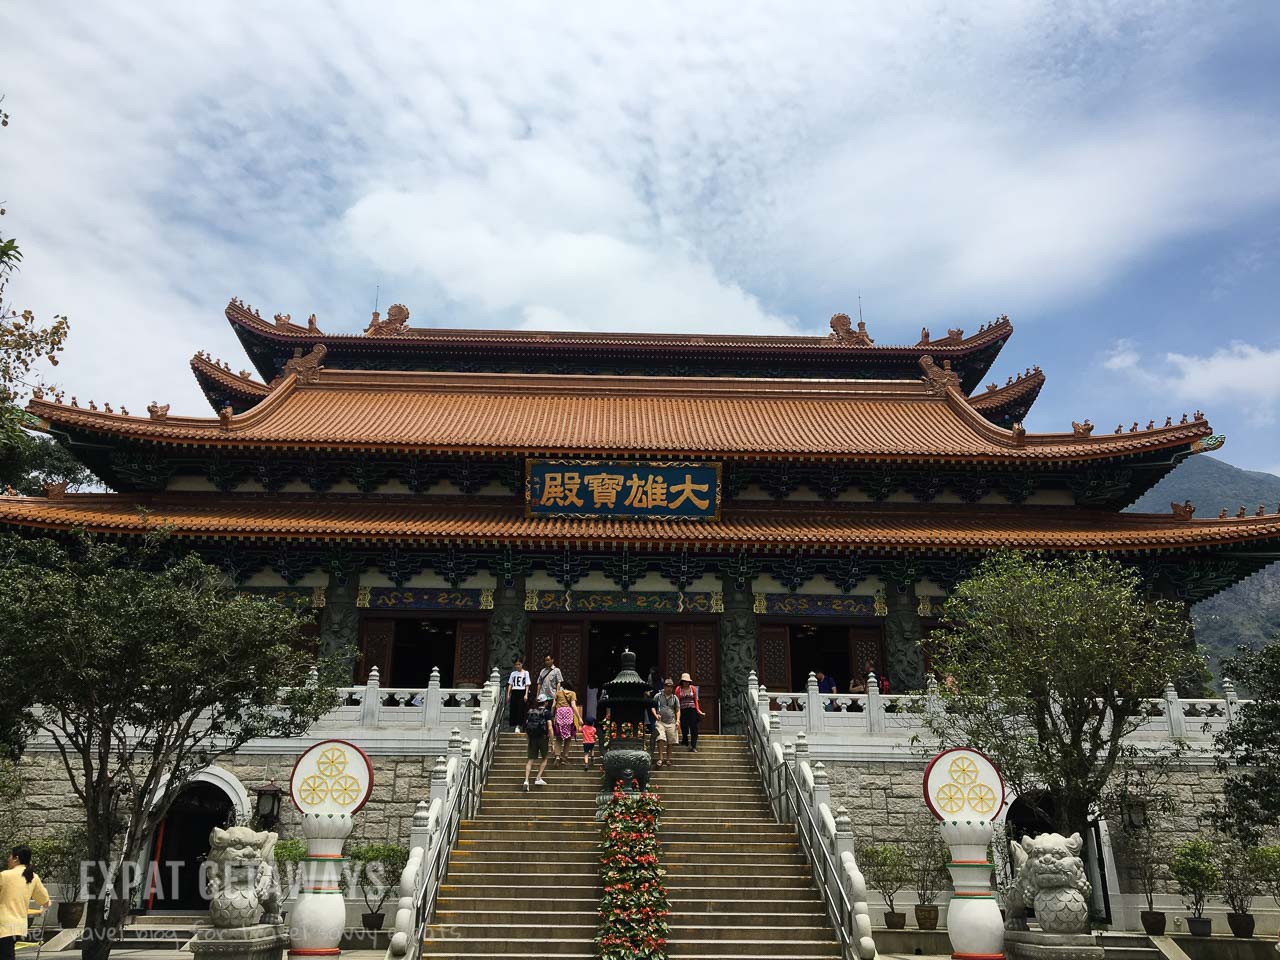 Next to the Big Buddha you will find the spectacular Po Lin Monastery. A great day trip while you are in Hong Kong. 